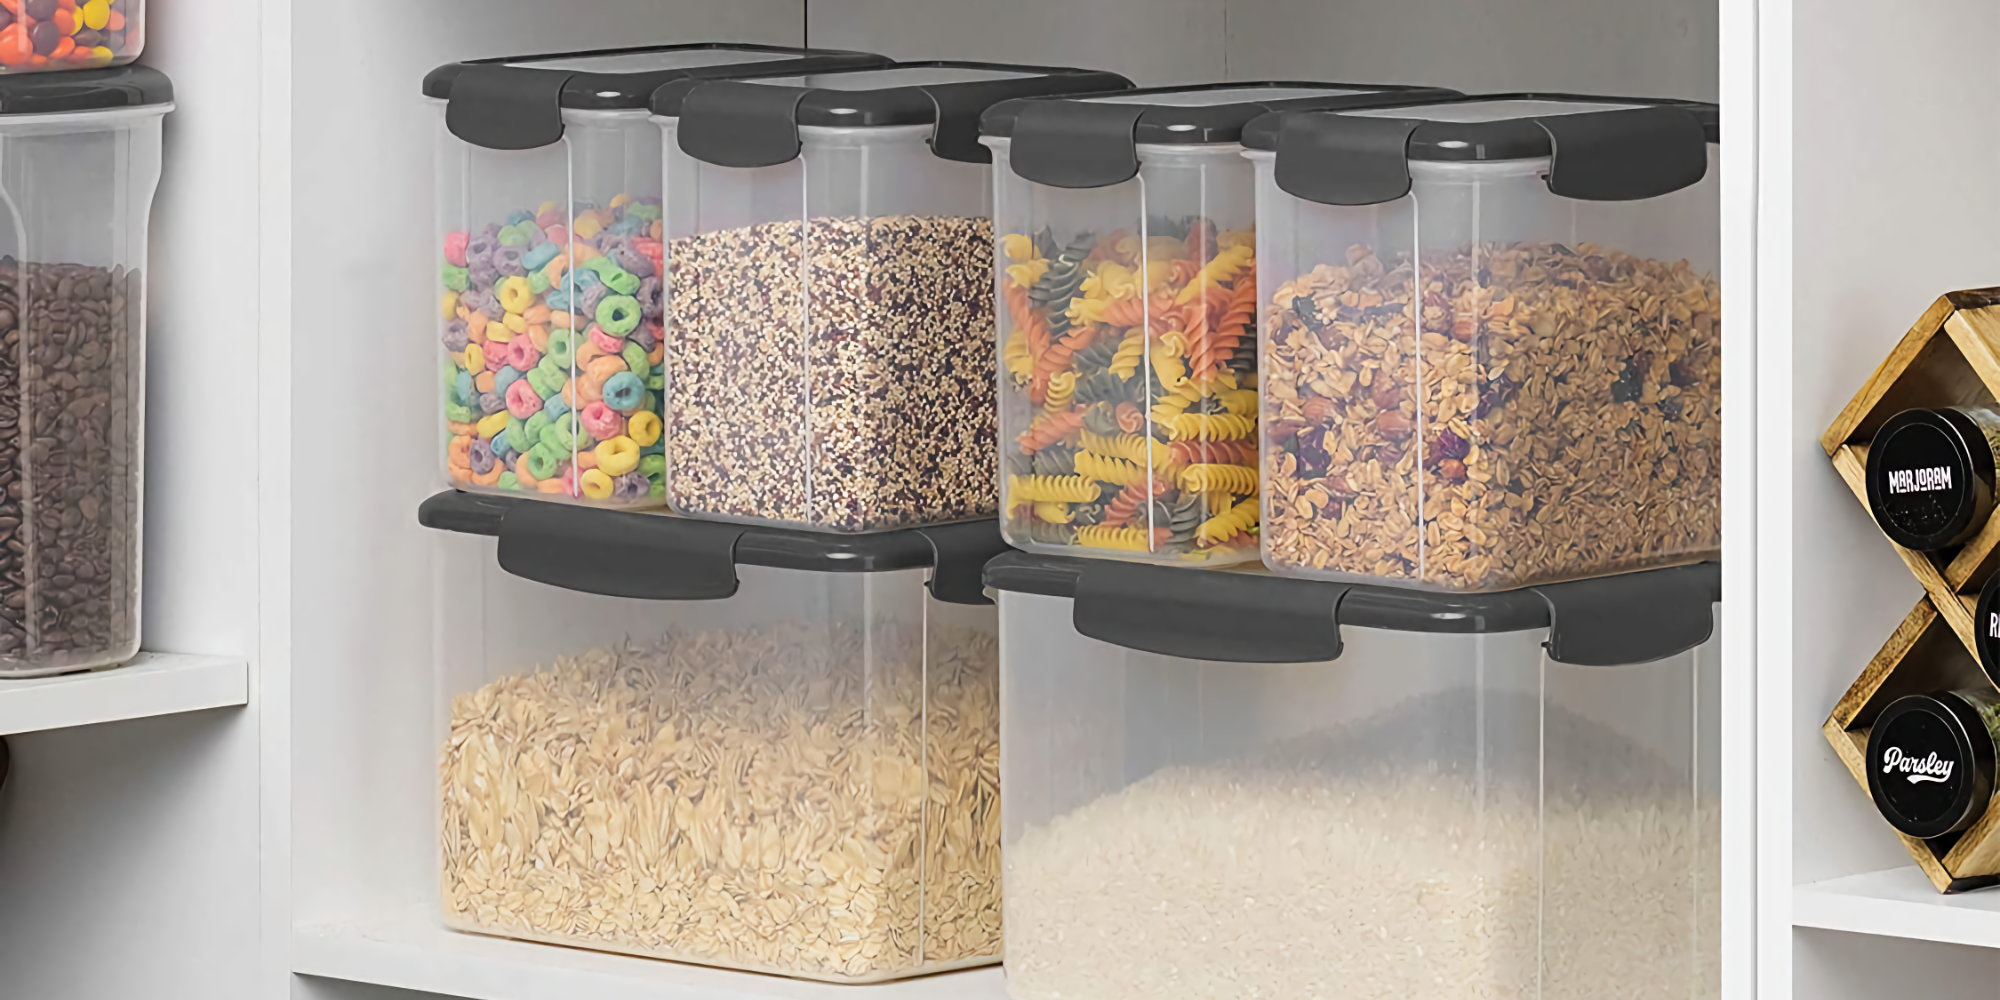  FineDine Airtight Food Storage Container Sets for